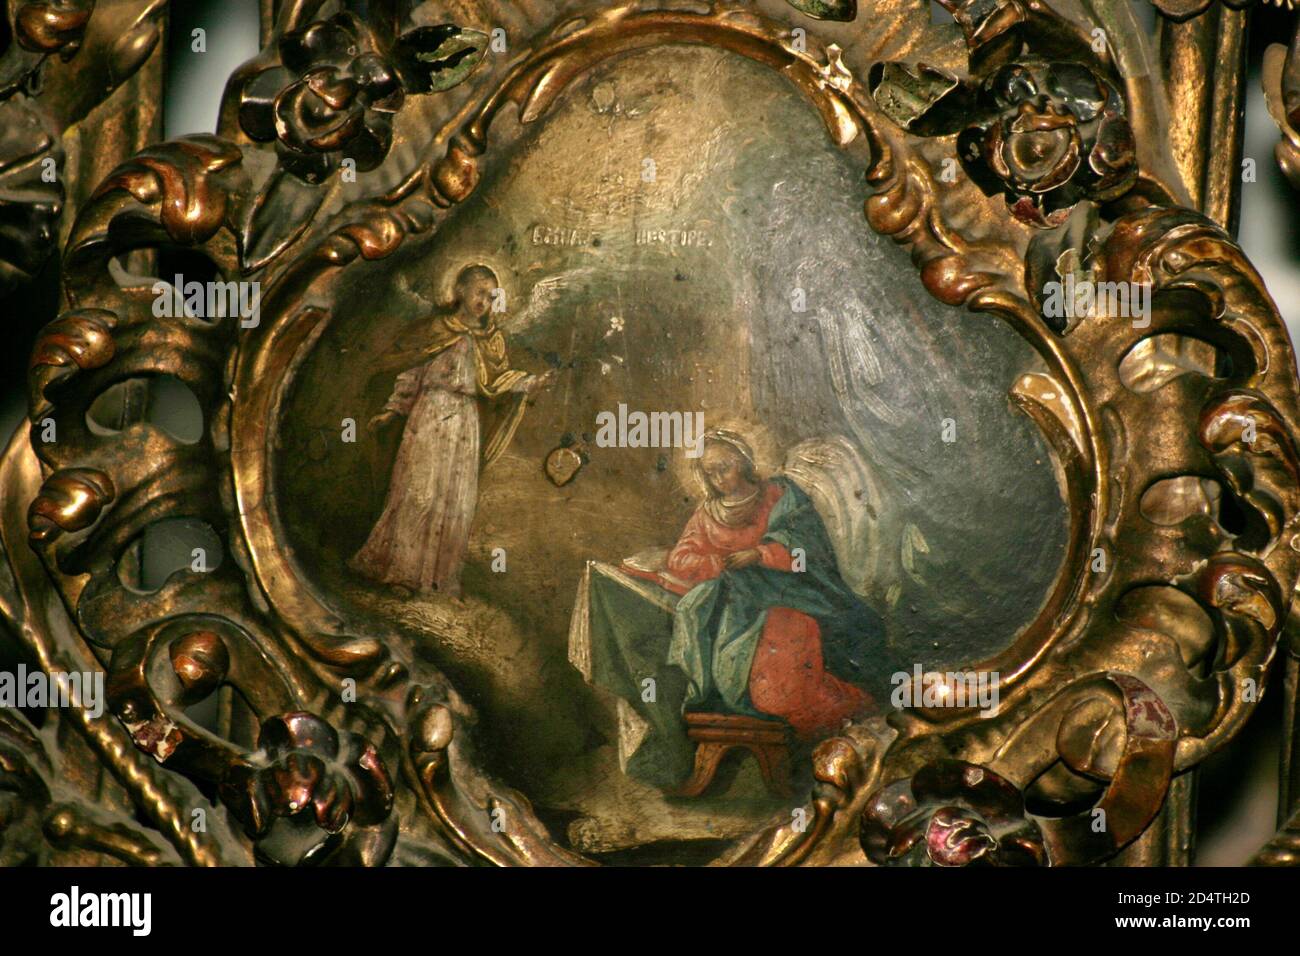 Zamfira Monastery, Romania. Painting by N. Grigorescu. The Annunciation to the Virgin Mary by the Archangel Gabriel. Stock Photo